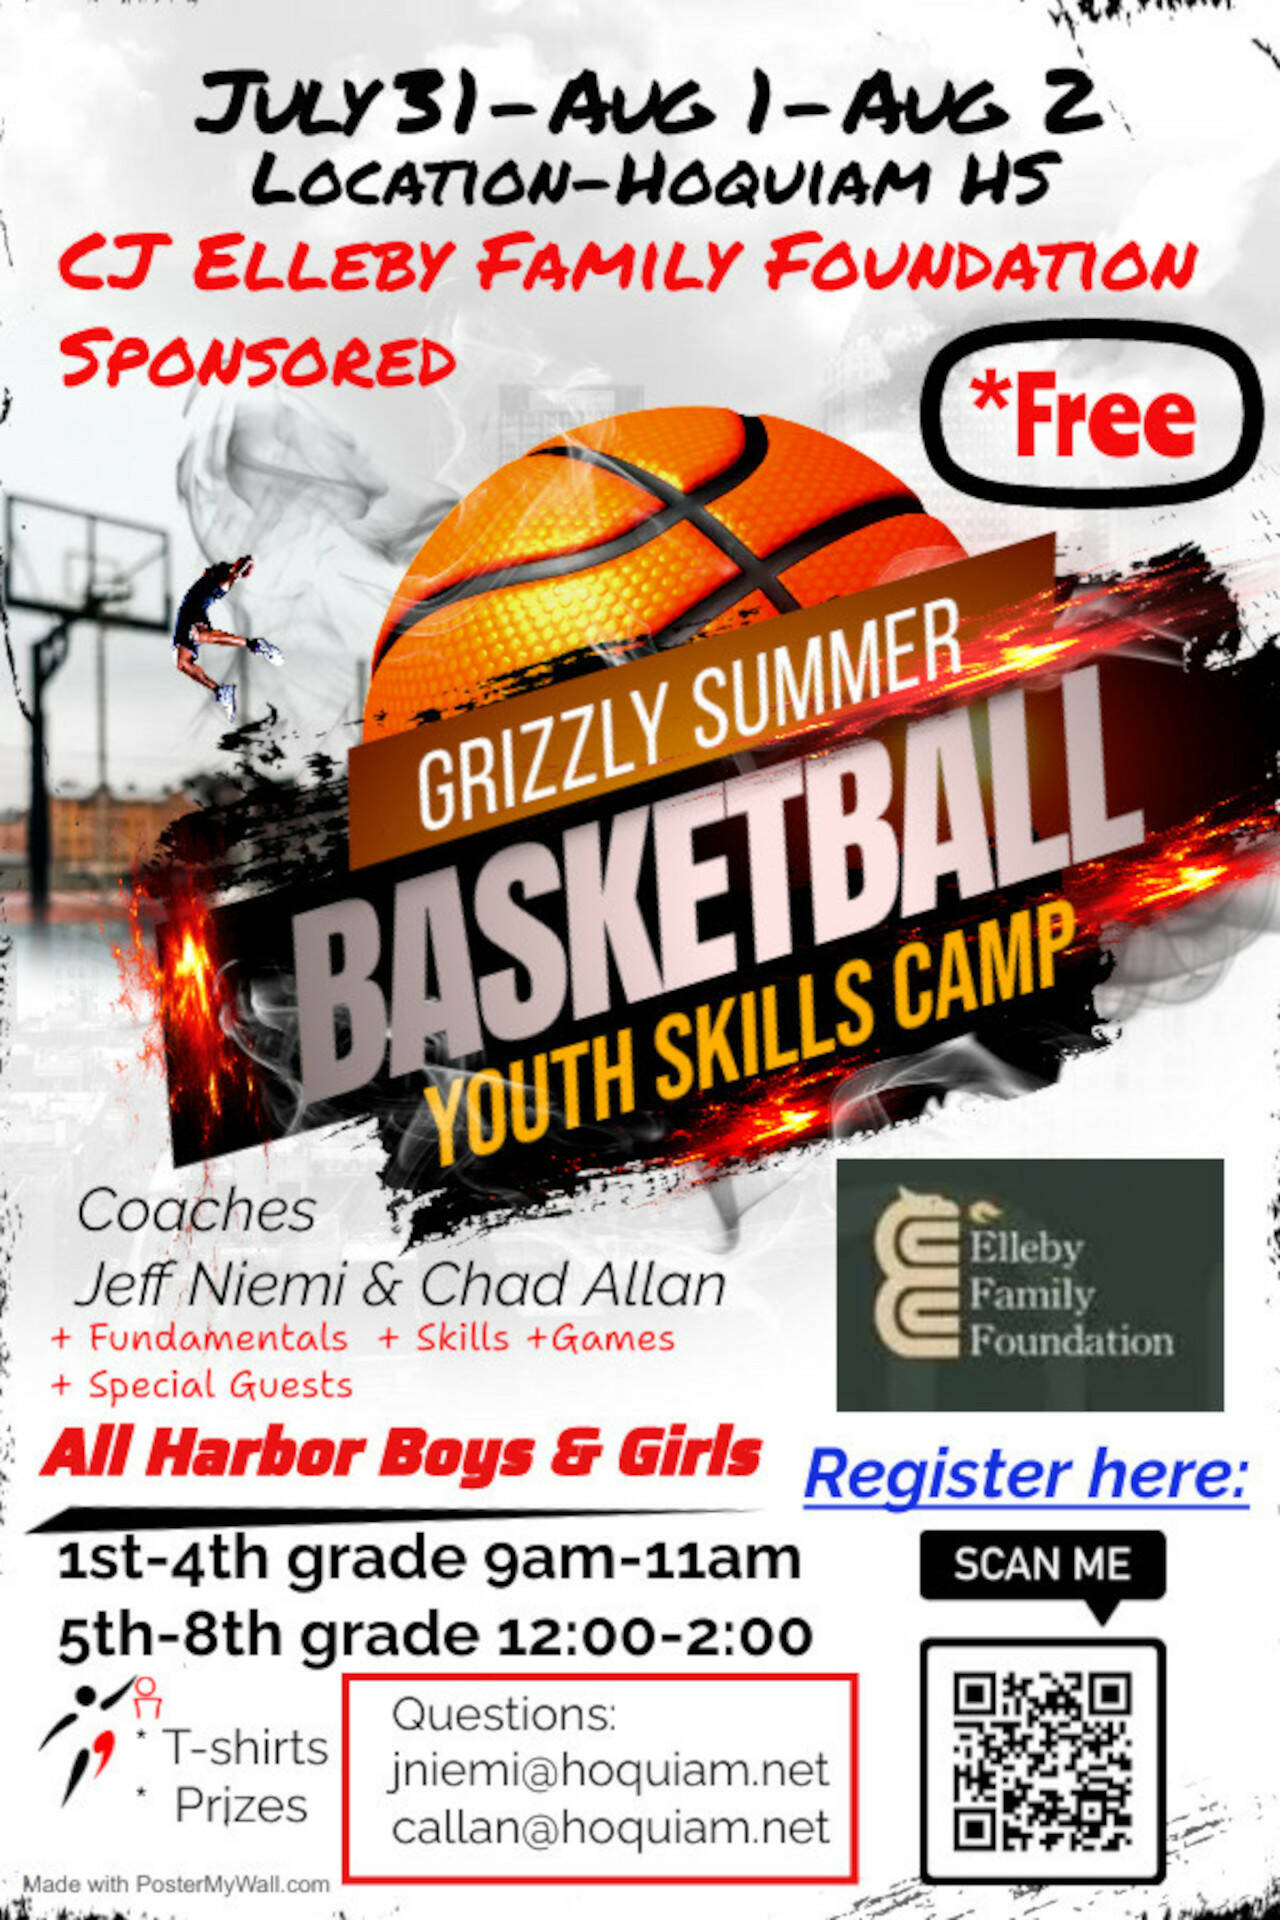 The Grizzly Summer Basketball Youth Skills Camp runs from July 31-Aug. 2 at Hoquiam High School.